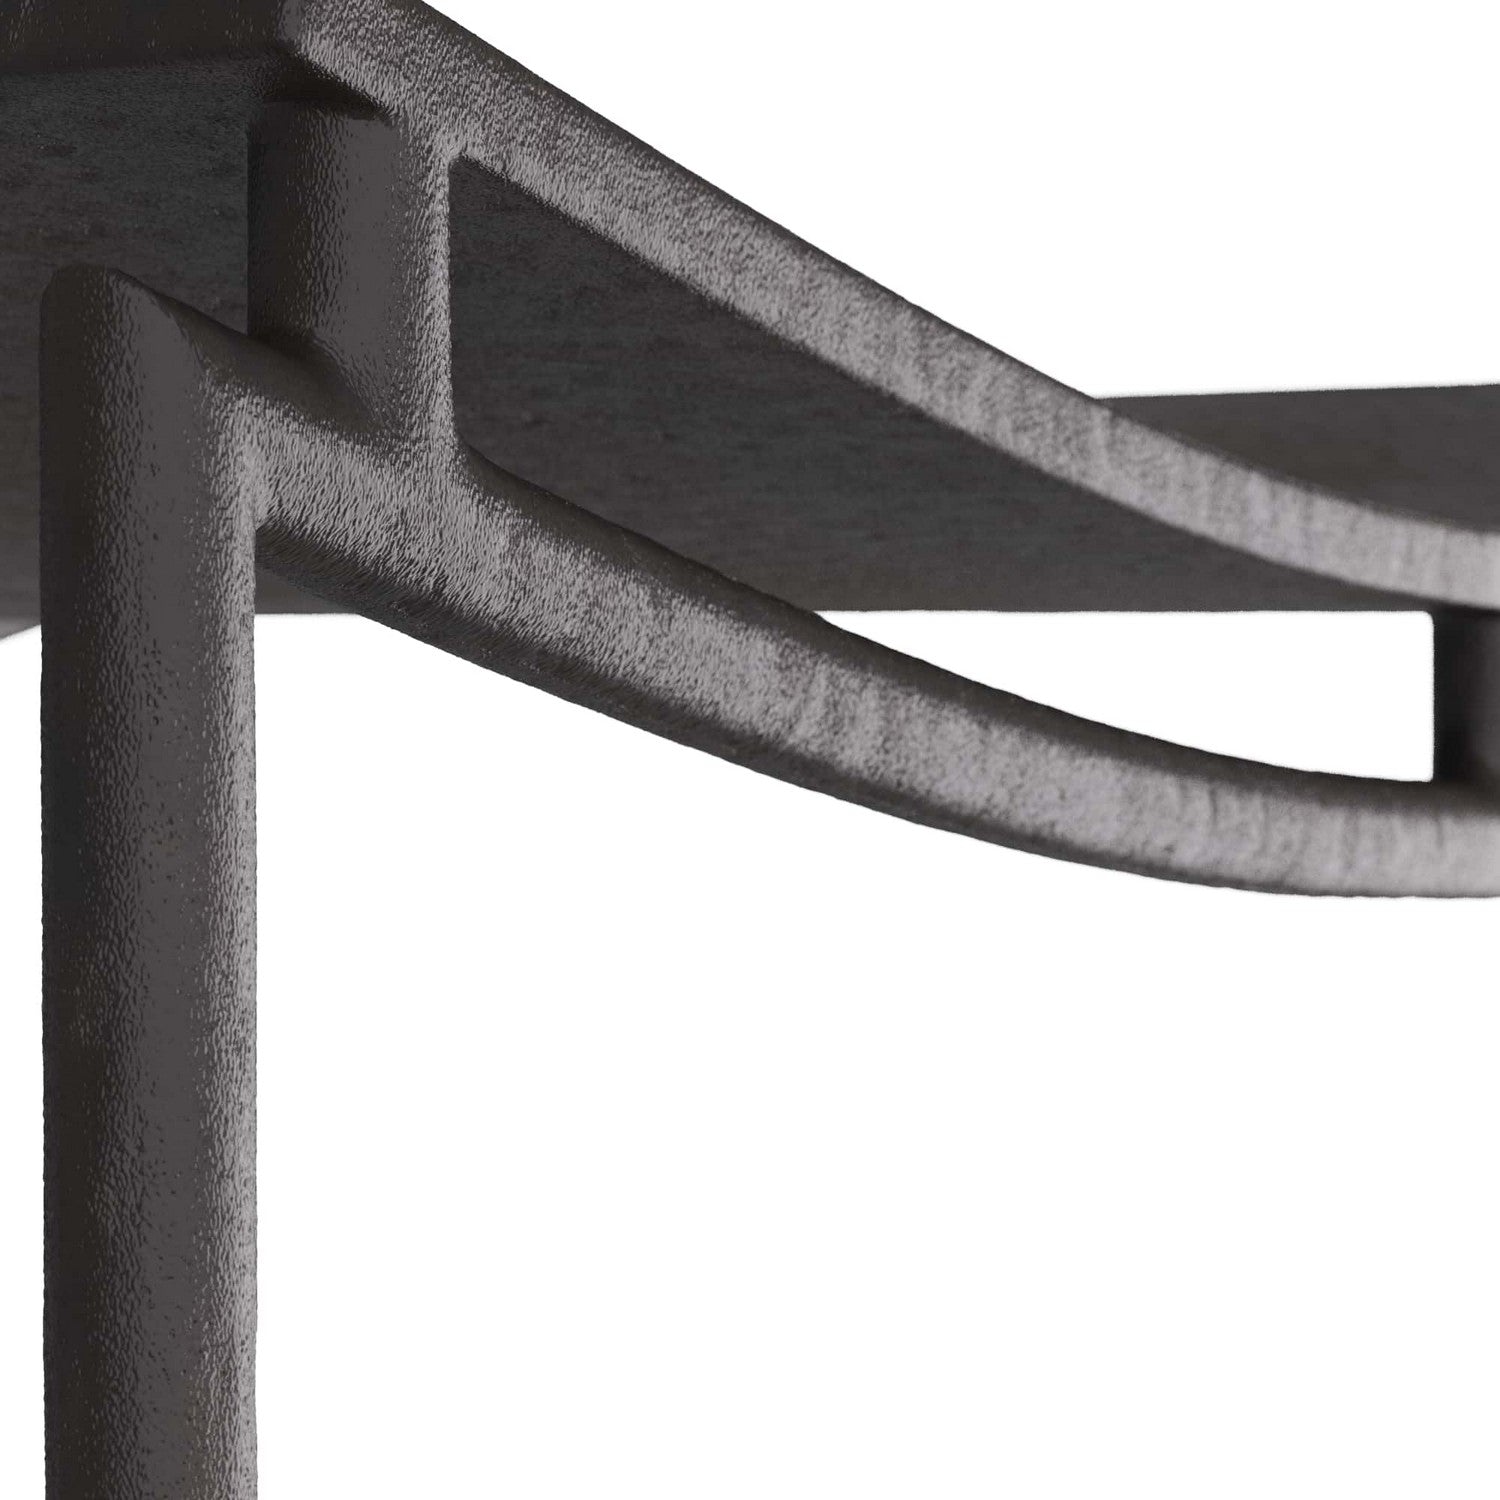 Bar Stool from the Jerome collection in Blackened Iron finish